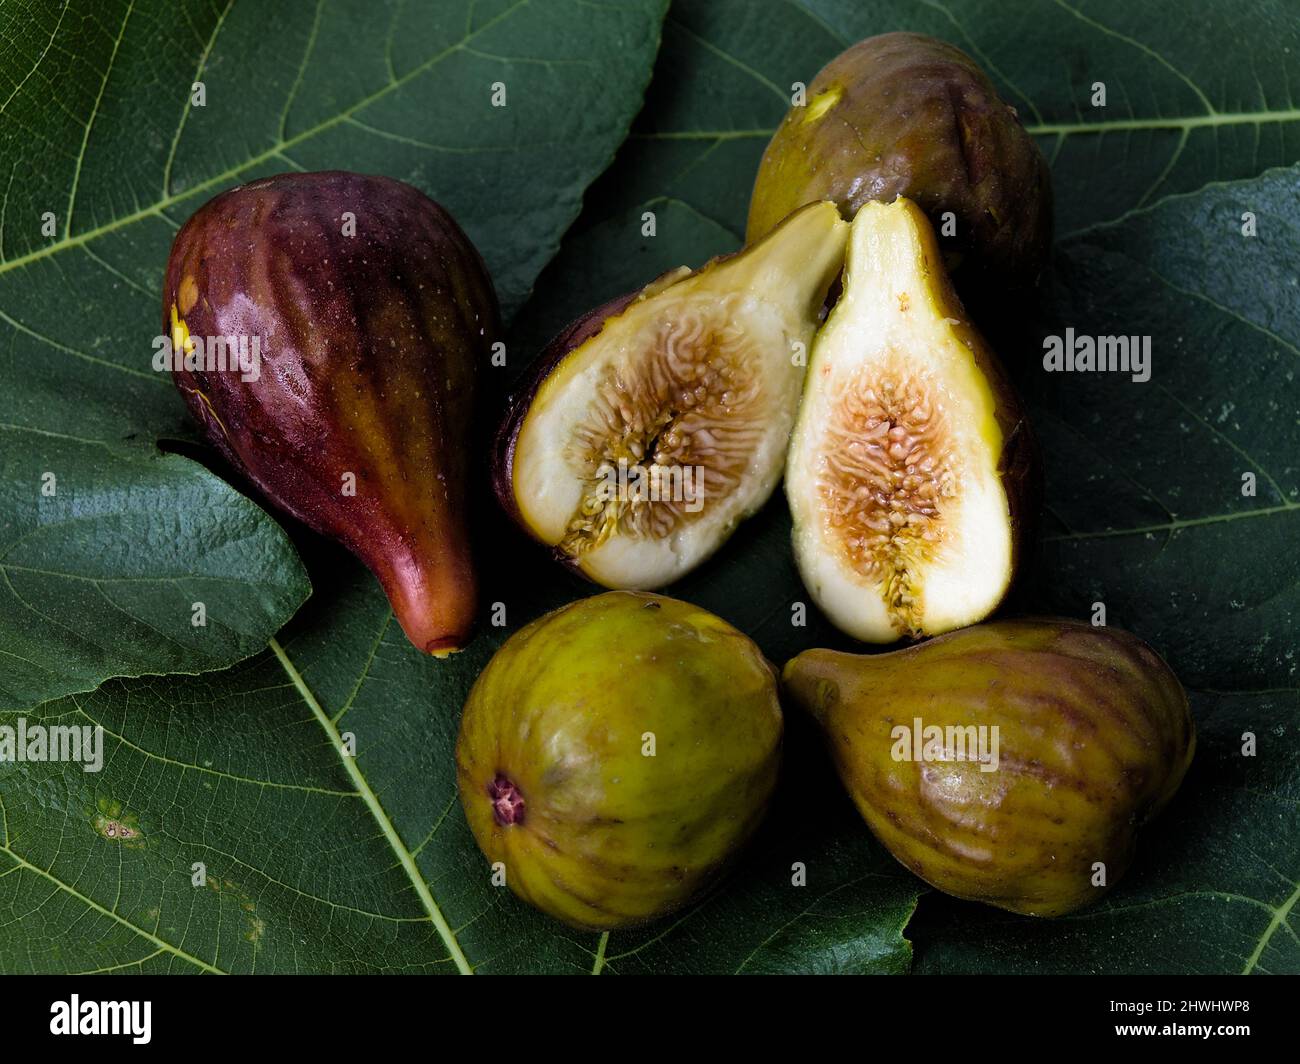 Fresh biological figs on a surface with fig leaves. Mediterranean diet Stock Photo